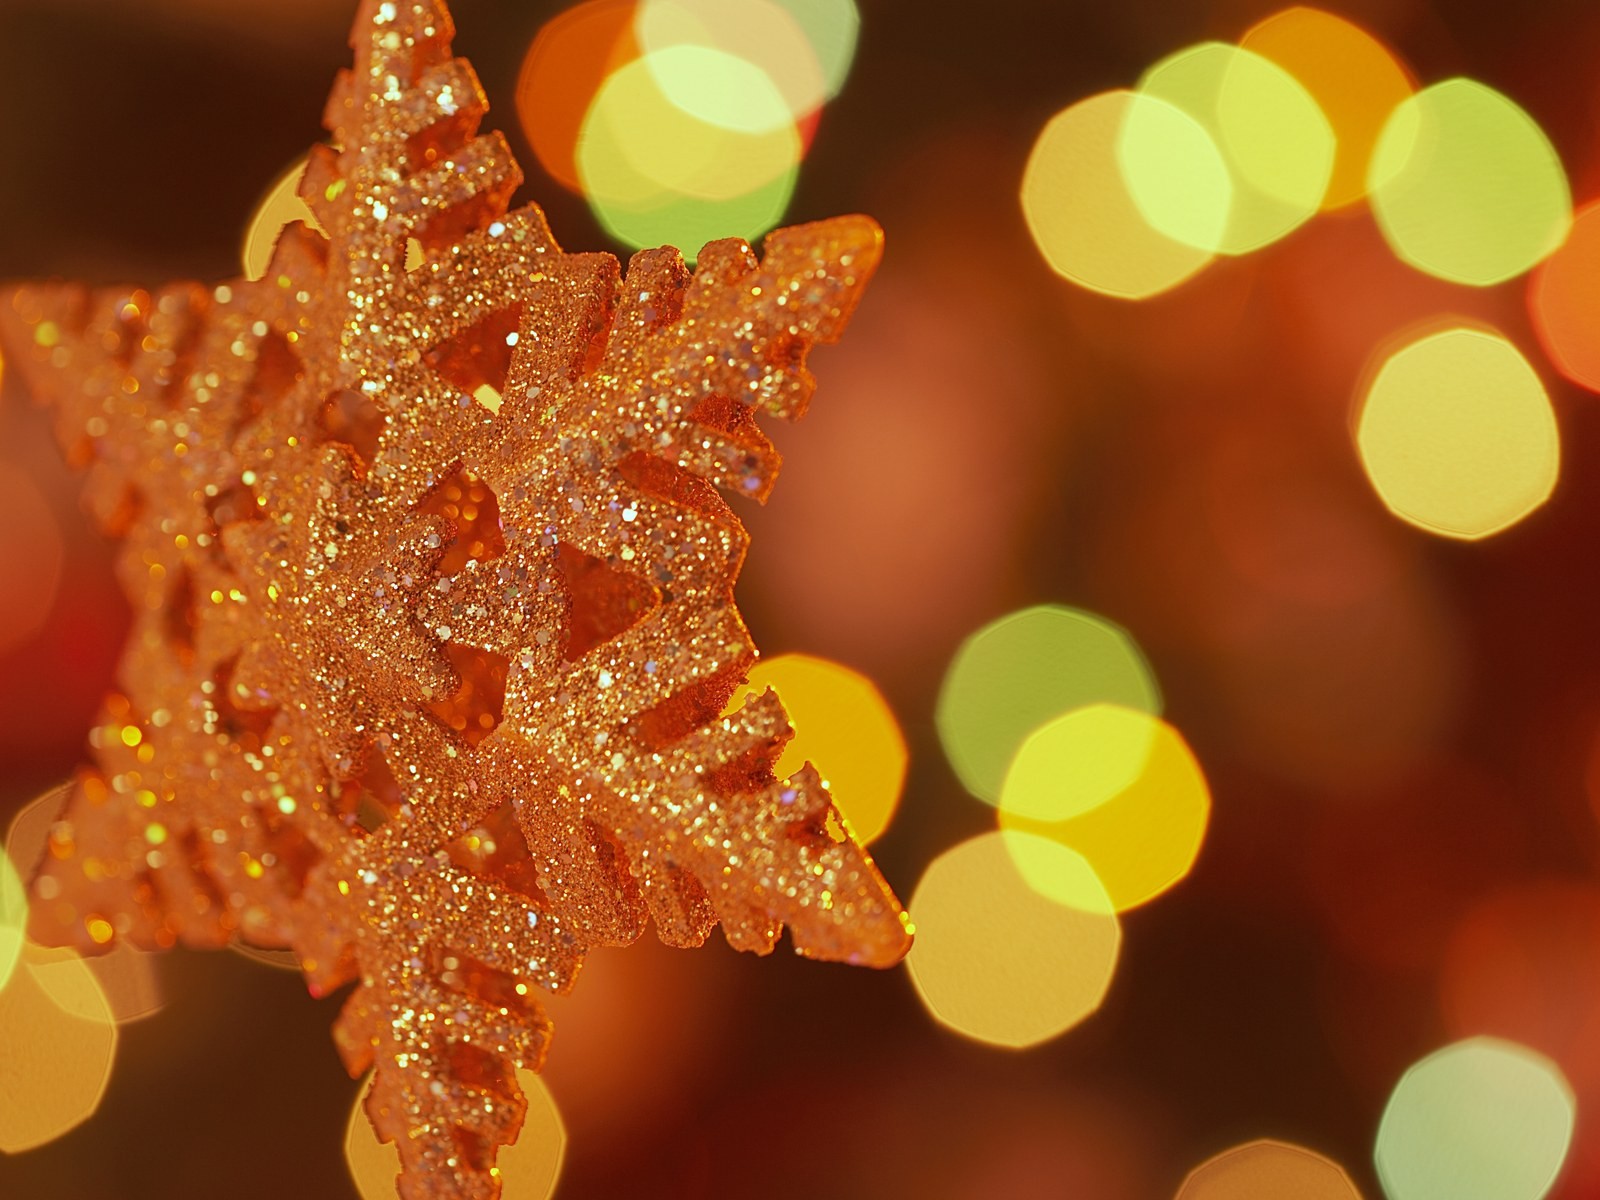 Happy Christmas decorations wallpapers #1 - 1600x1200